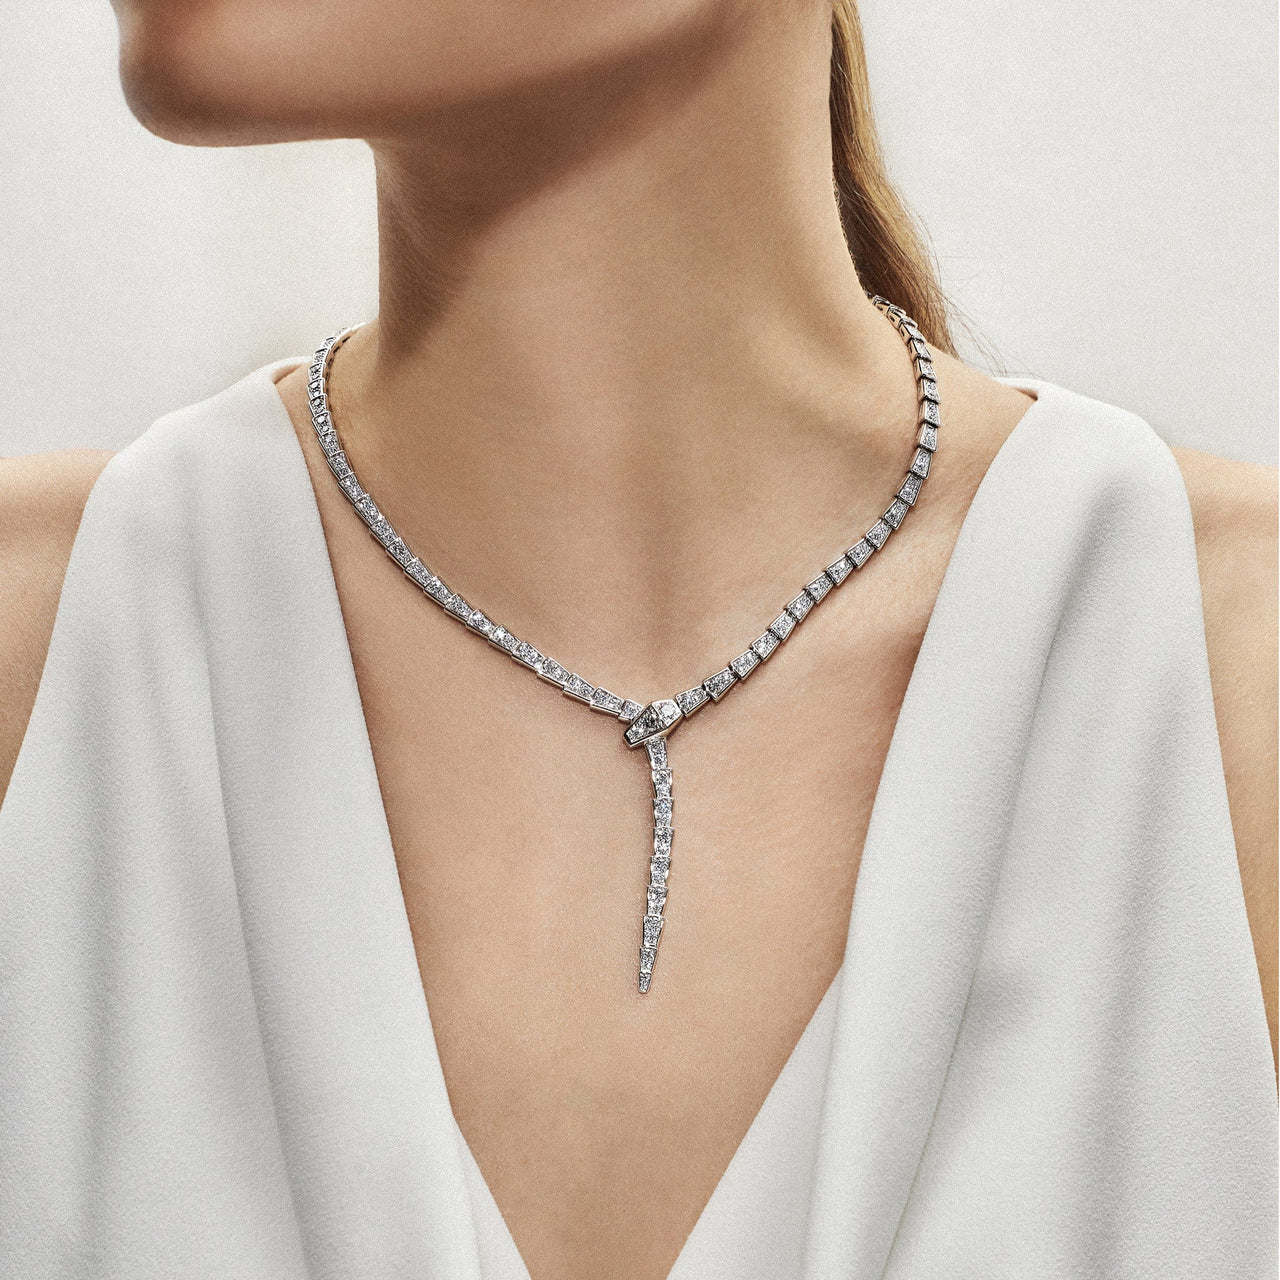 Serpenti Jewelry Collection - Captivating and Seductive